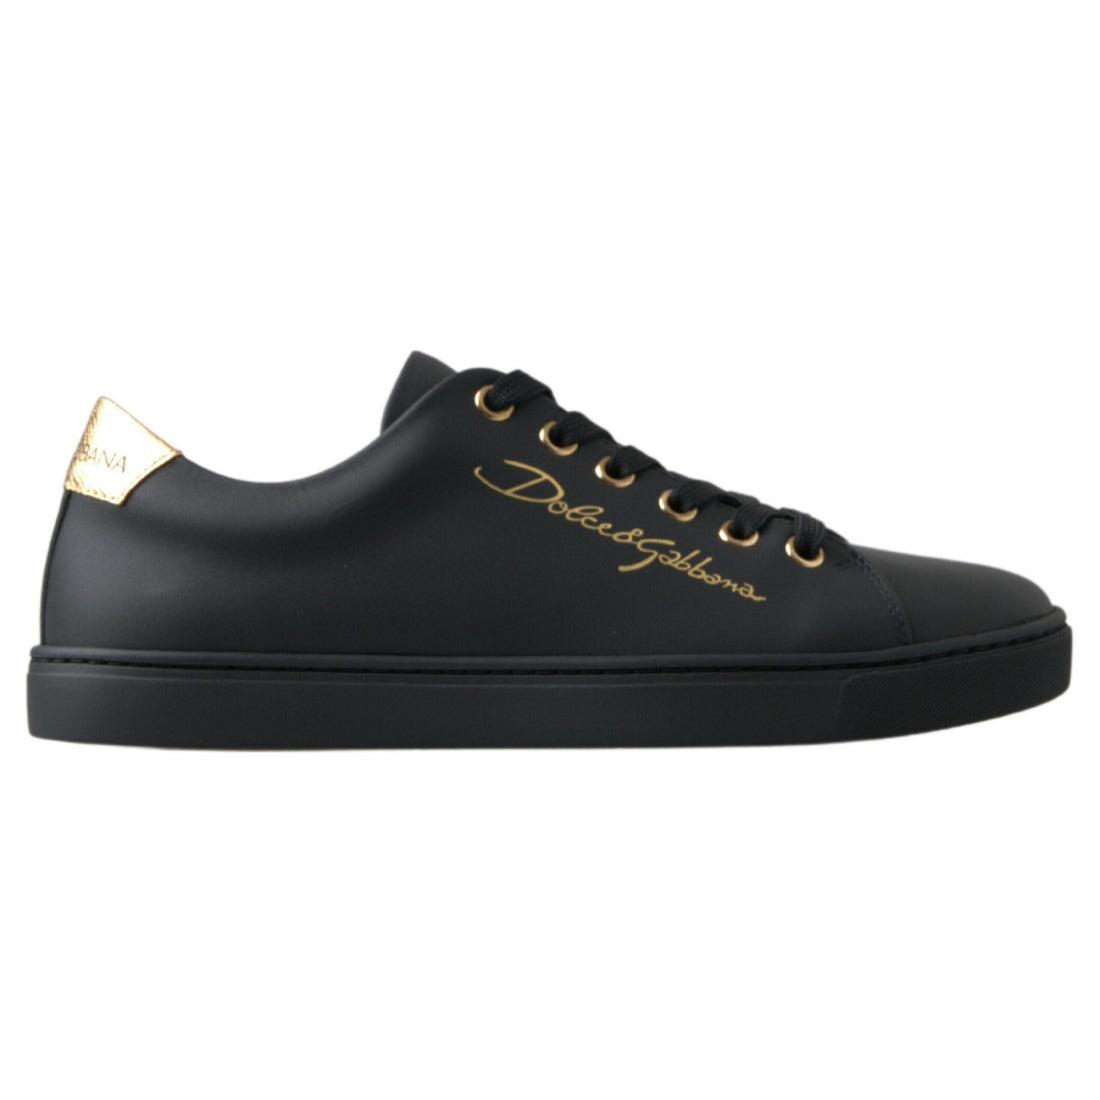 Dolce & Gabbana Black Gold Leather Classic Sneakers Shoes